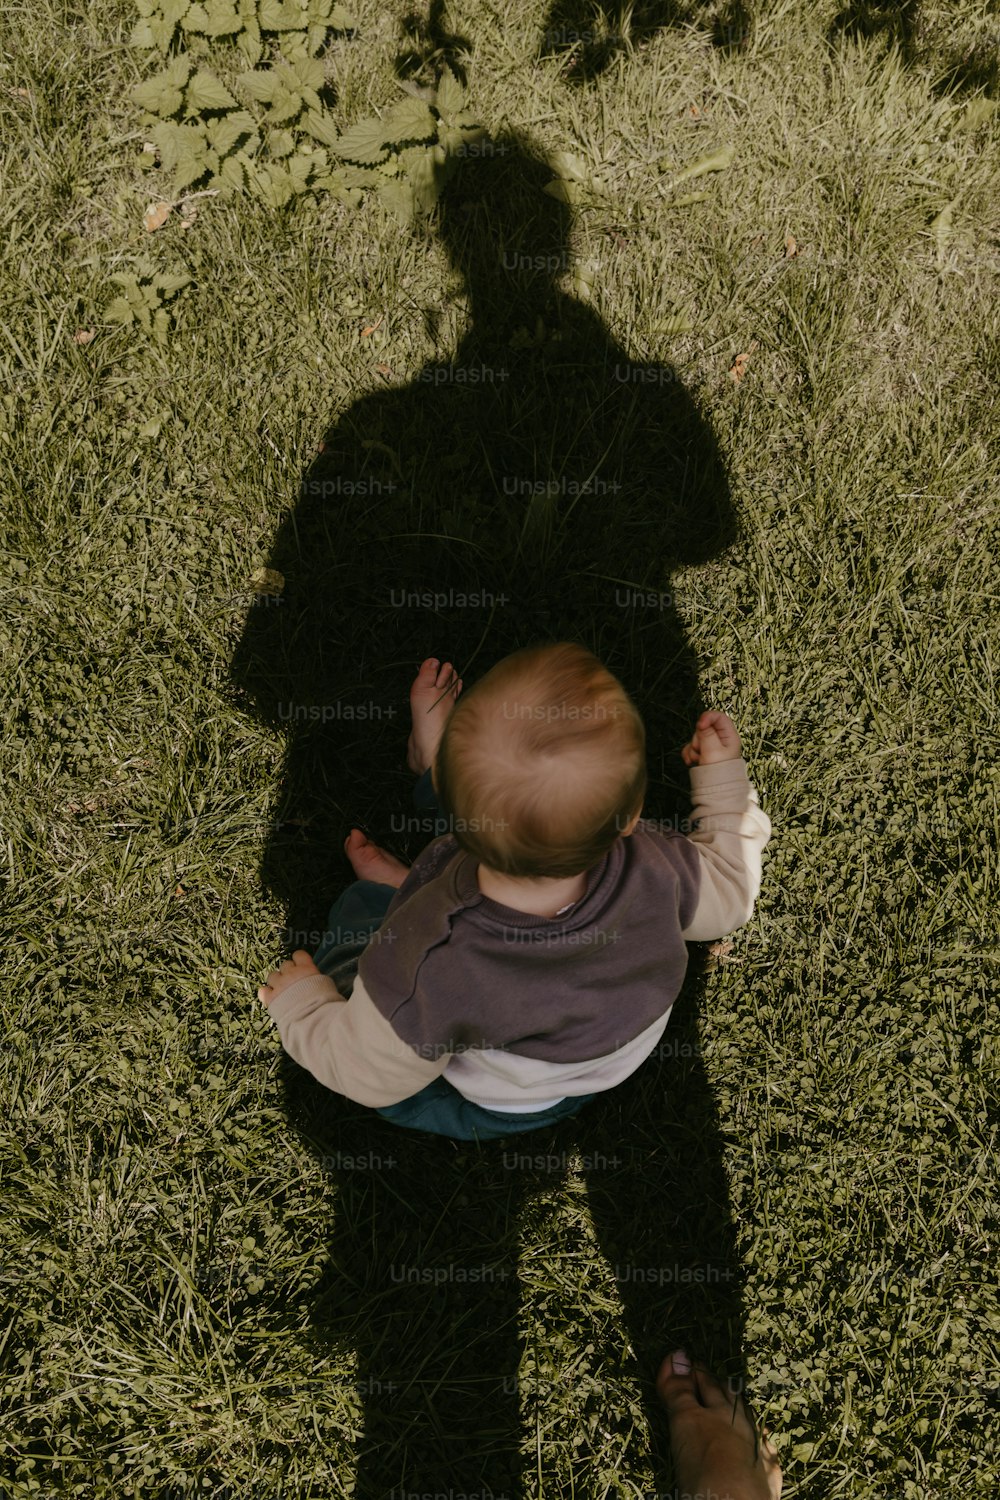 a shadow of a person holding a baby